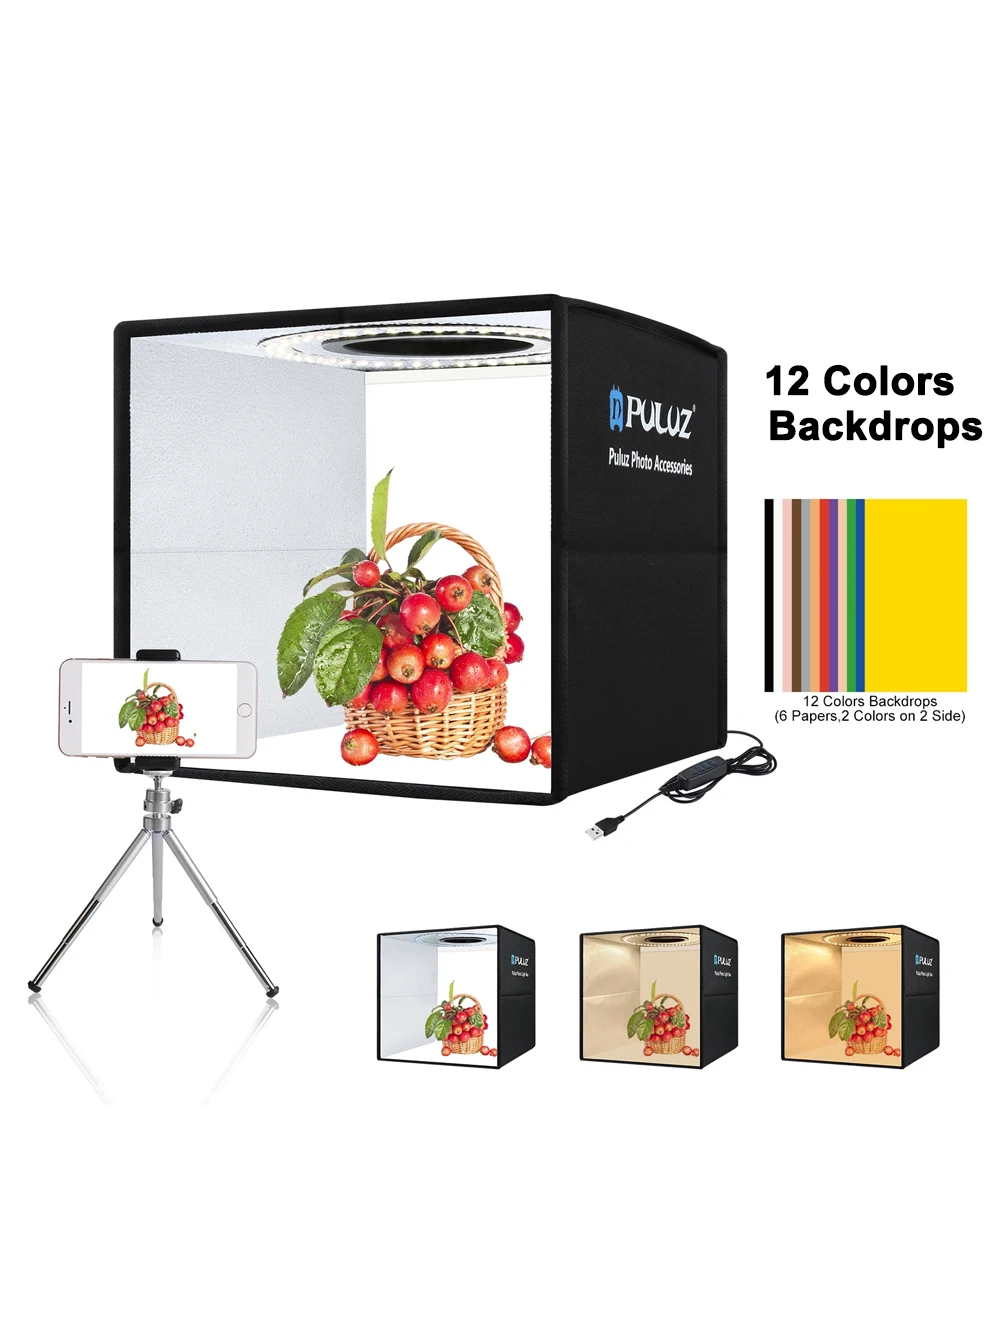 Sb307eb4ee75f45378a18cc57ef37b998M Puluz Mini Photo Studio Light Box,Portable Photo Studio Shooting Tent Box Kit,Photography Lightbox With 6/12 Colors Backgrounds